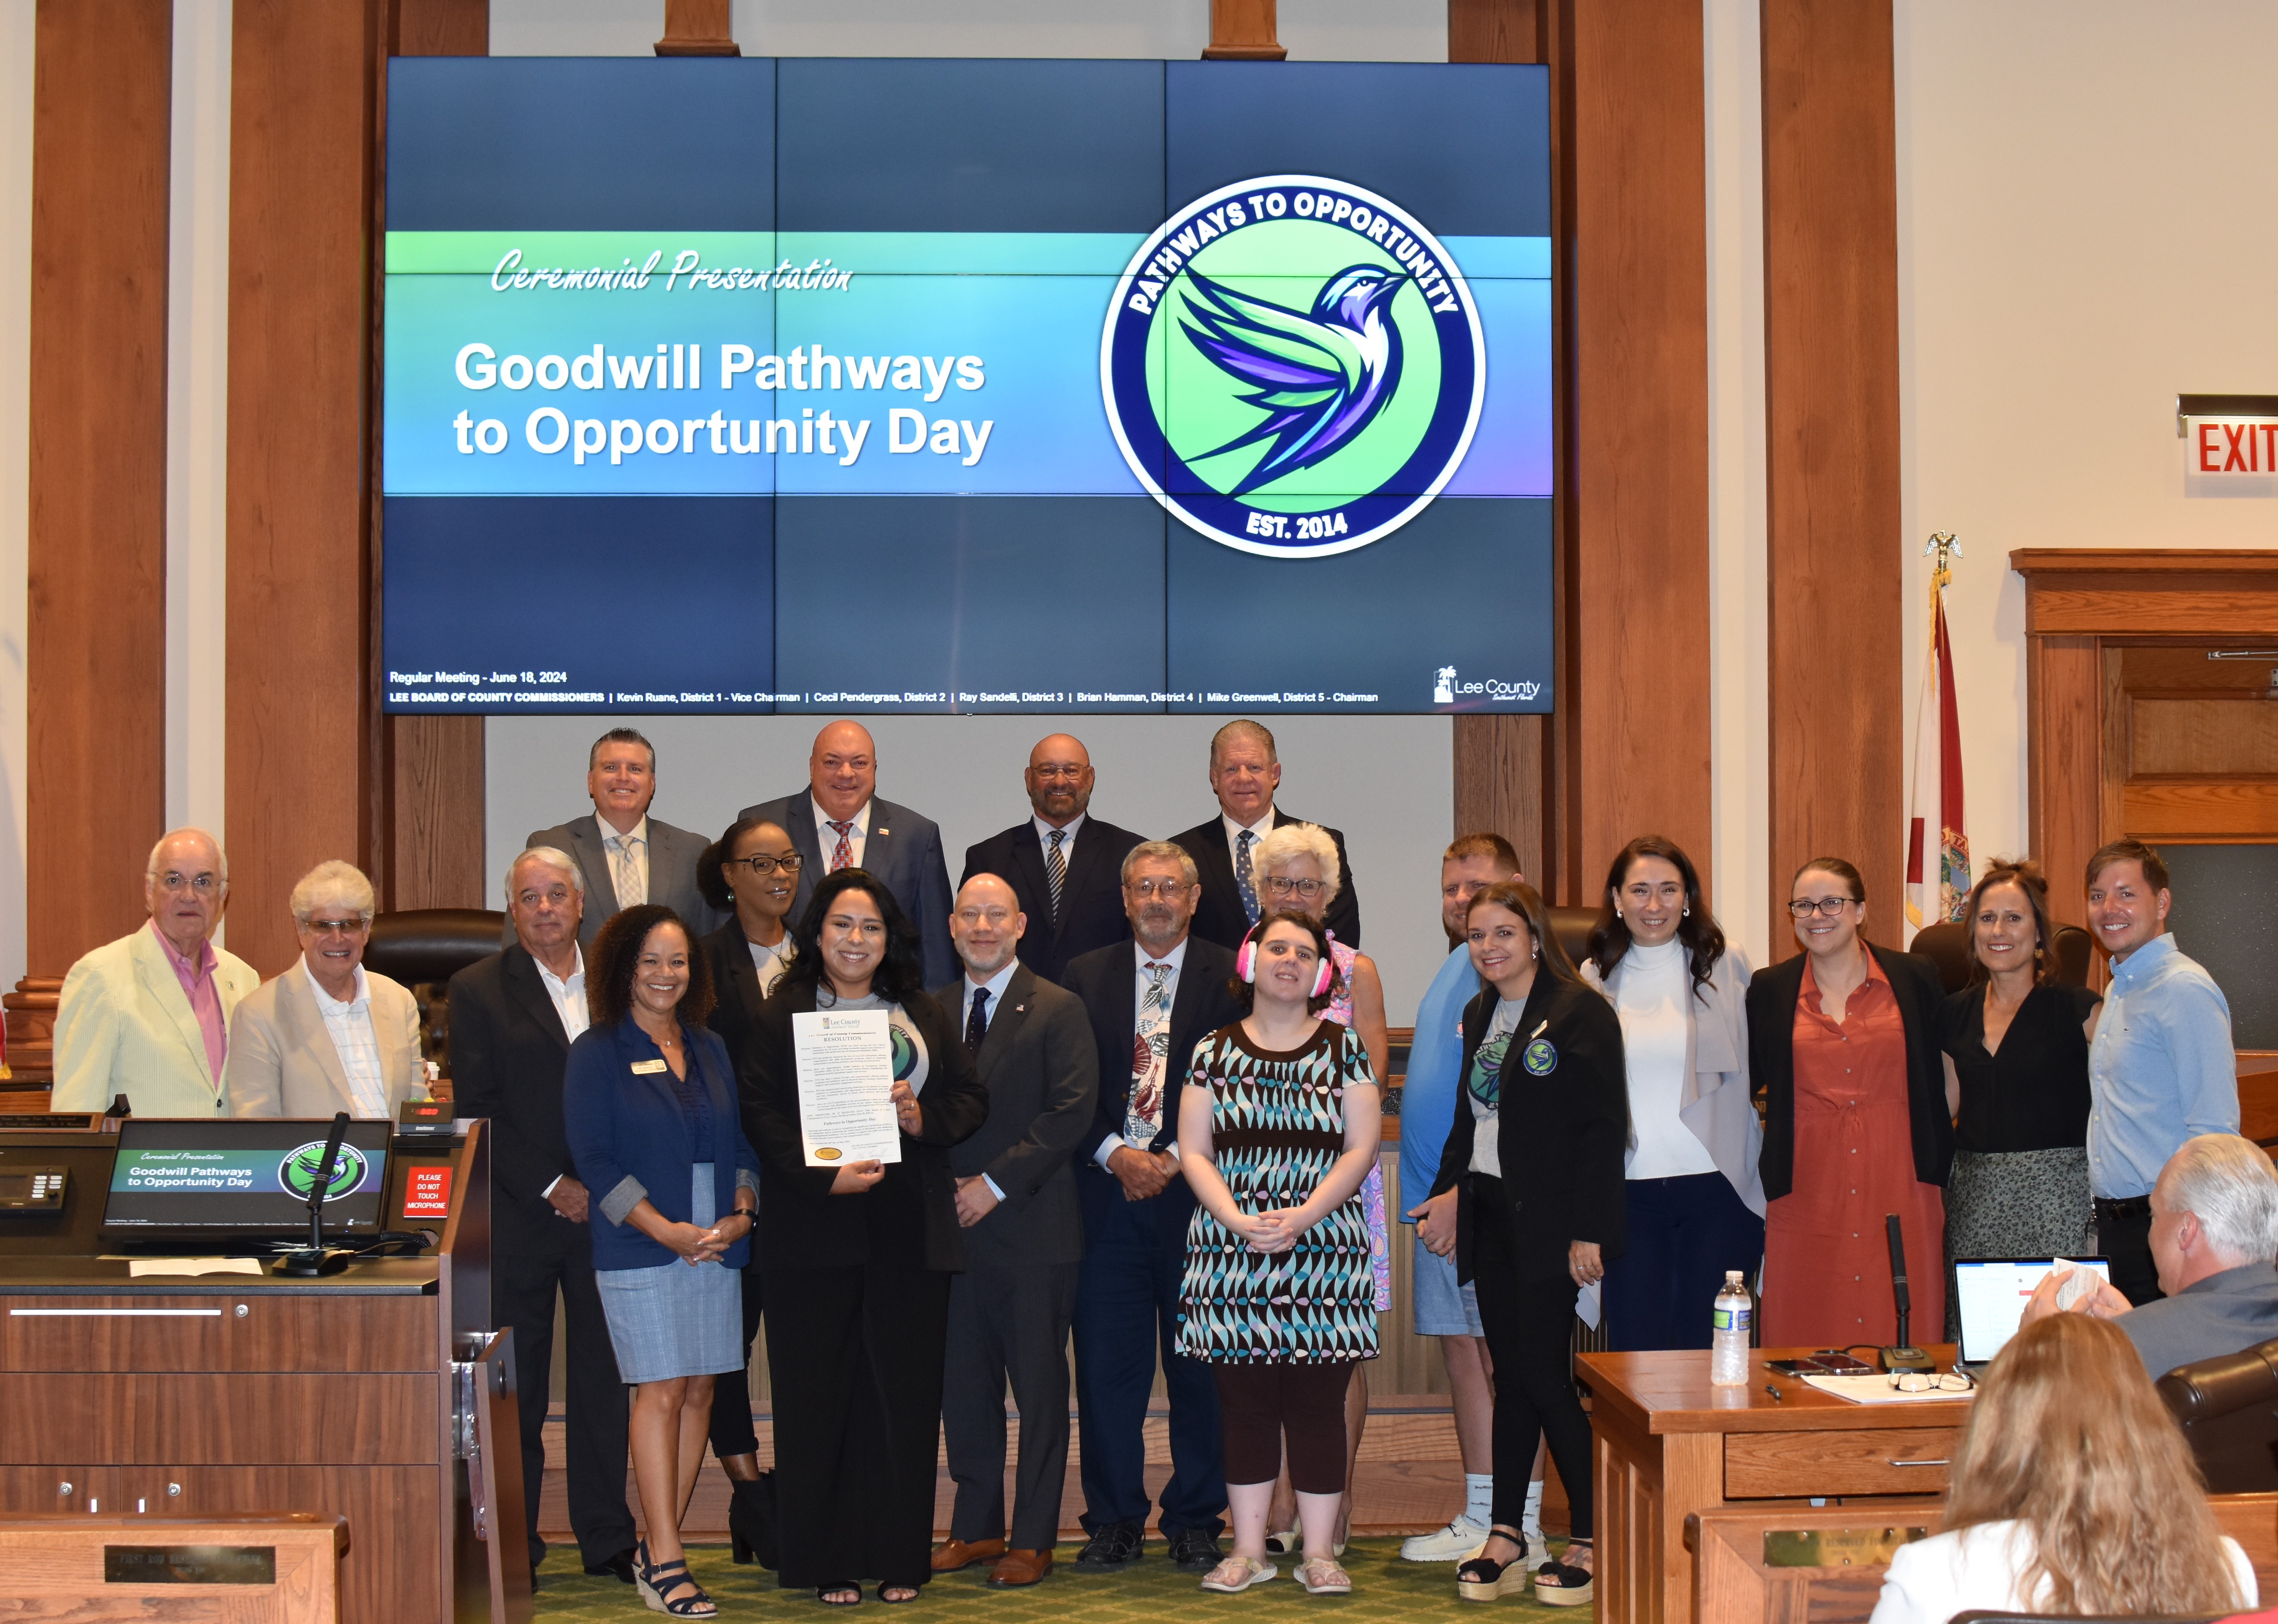 06-18-24 Goodwill Pathways to Opportunity Day